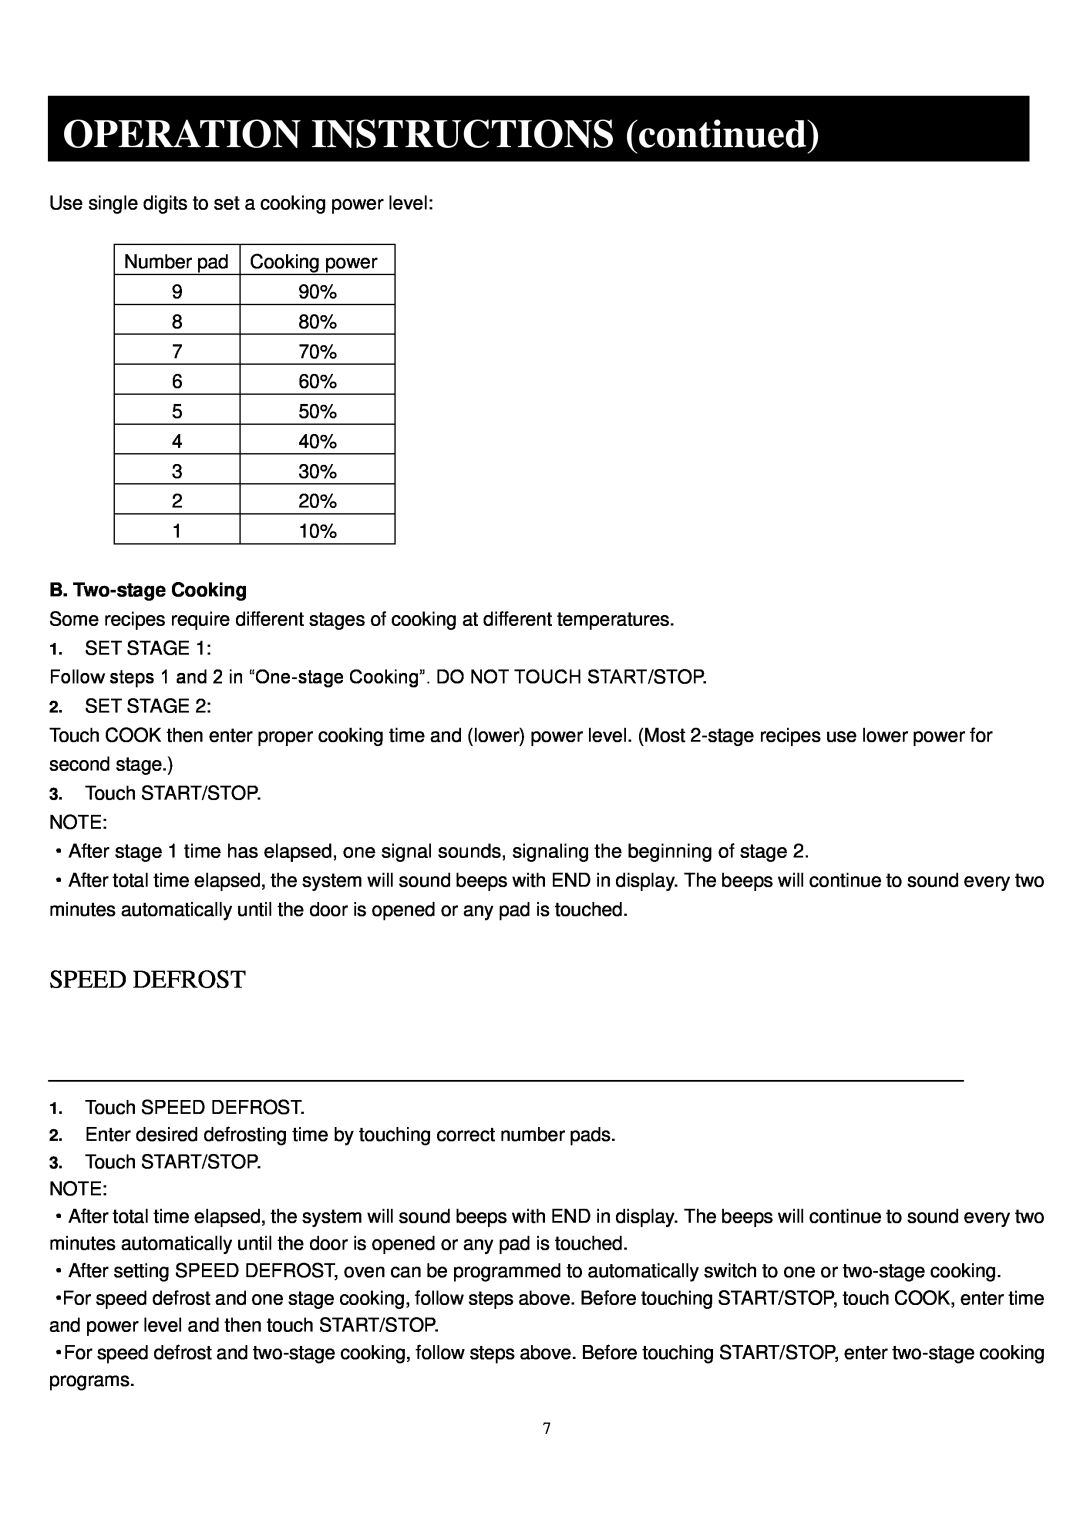 Sunbeam SGA9901 manual OPERATION INSTRUCTIONS continued, Speed Defrost, B. Two-stageCooking 